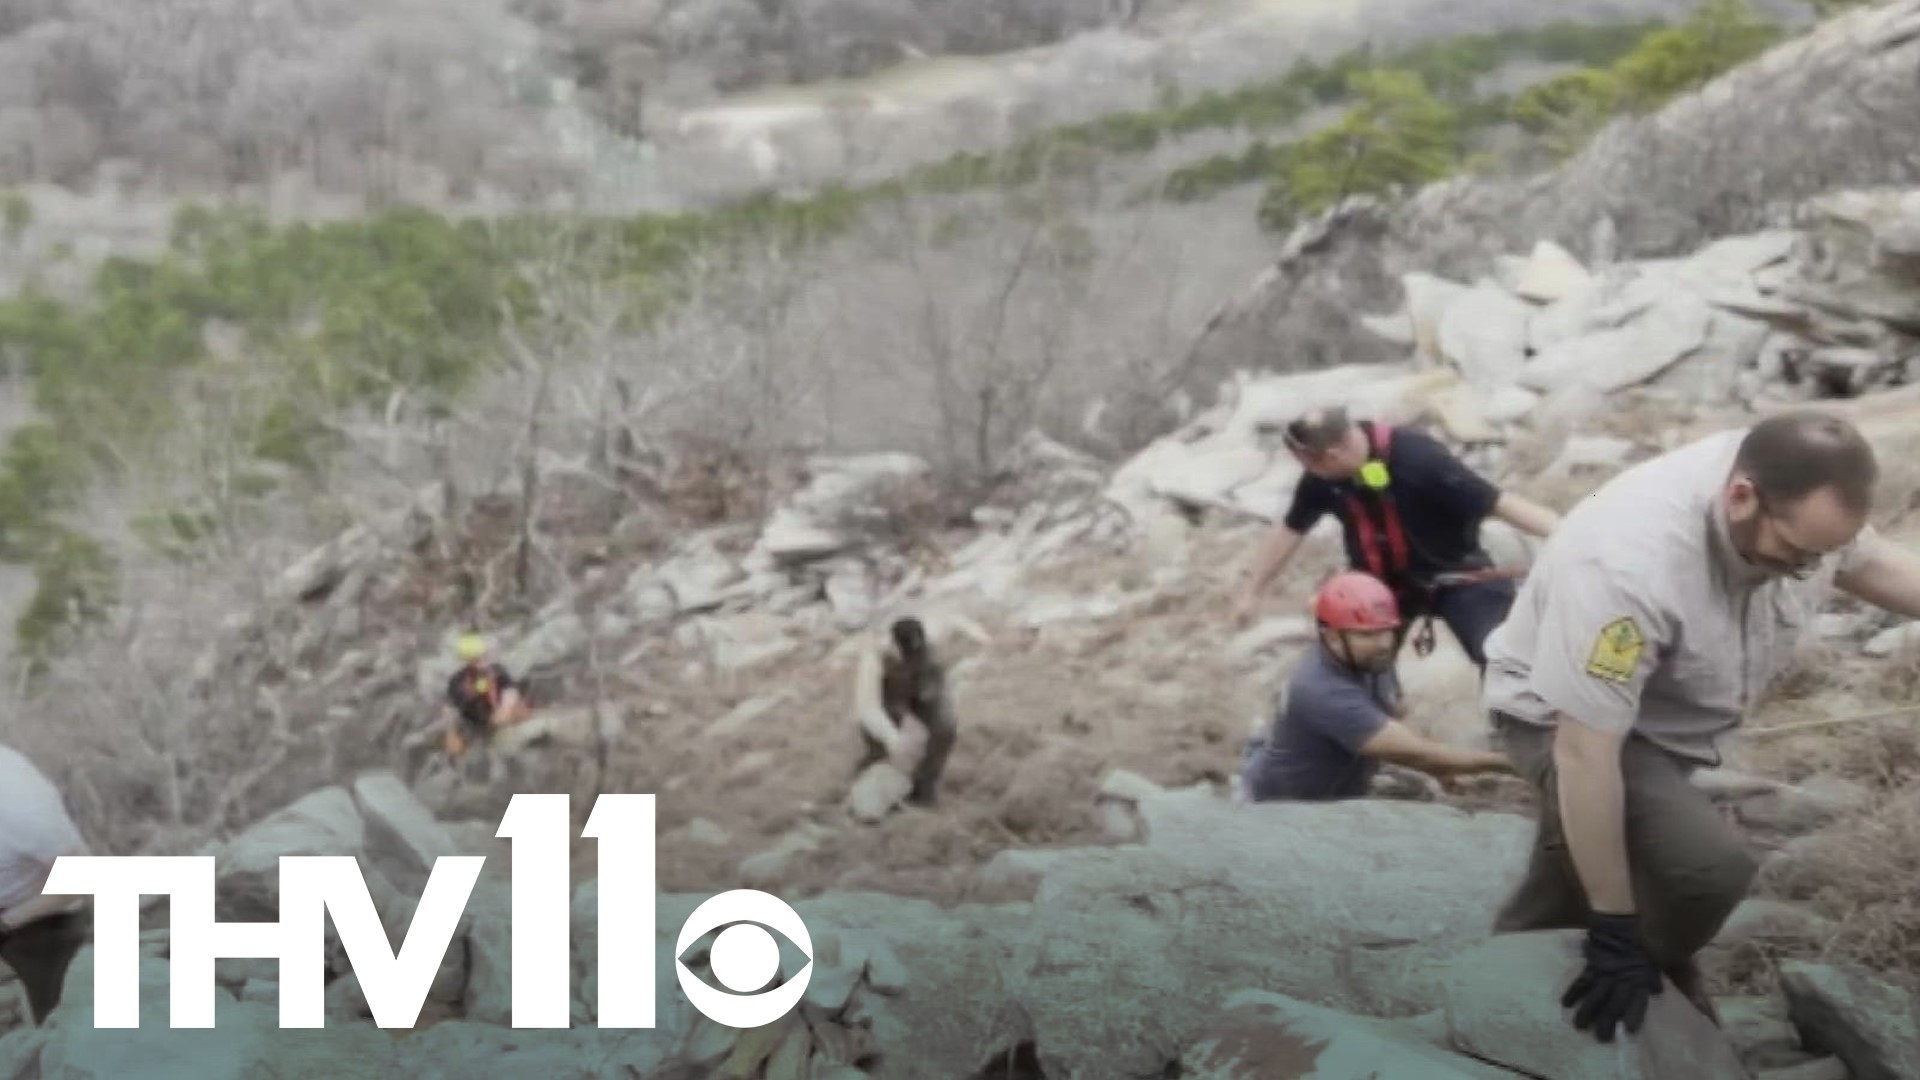 Over the weekend, one family who found themselves too far away from the trail ended up needing to be rescued after they got stuck on the side of Pinnacle Mountain.